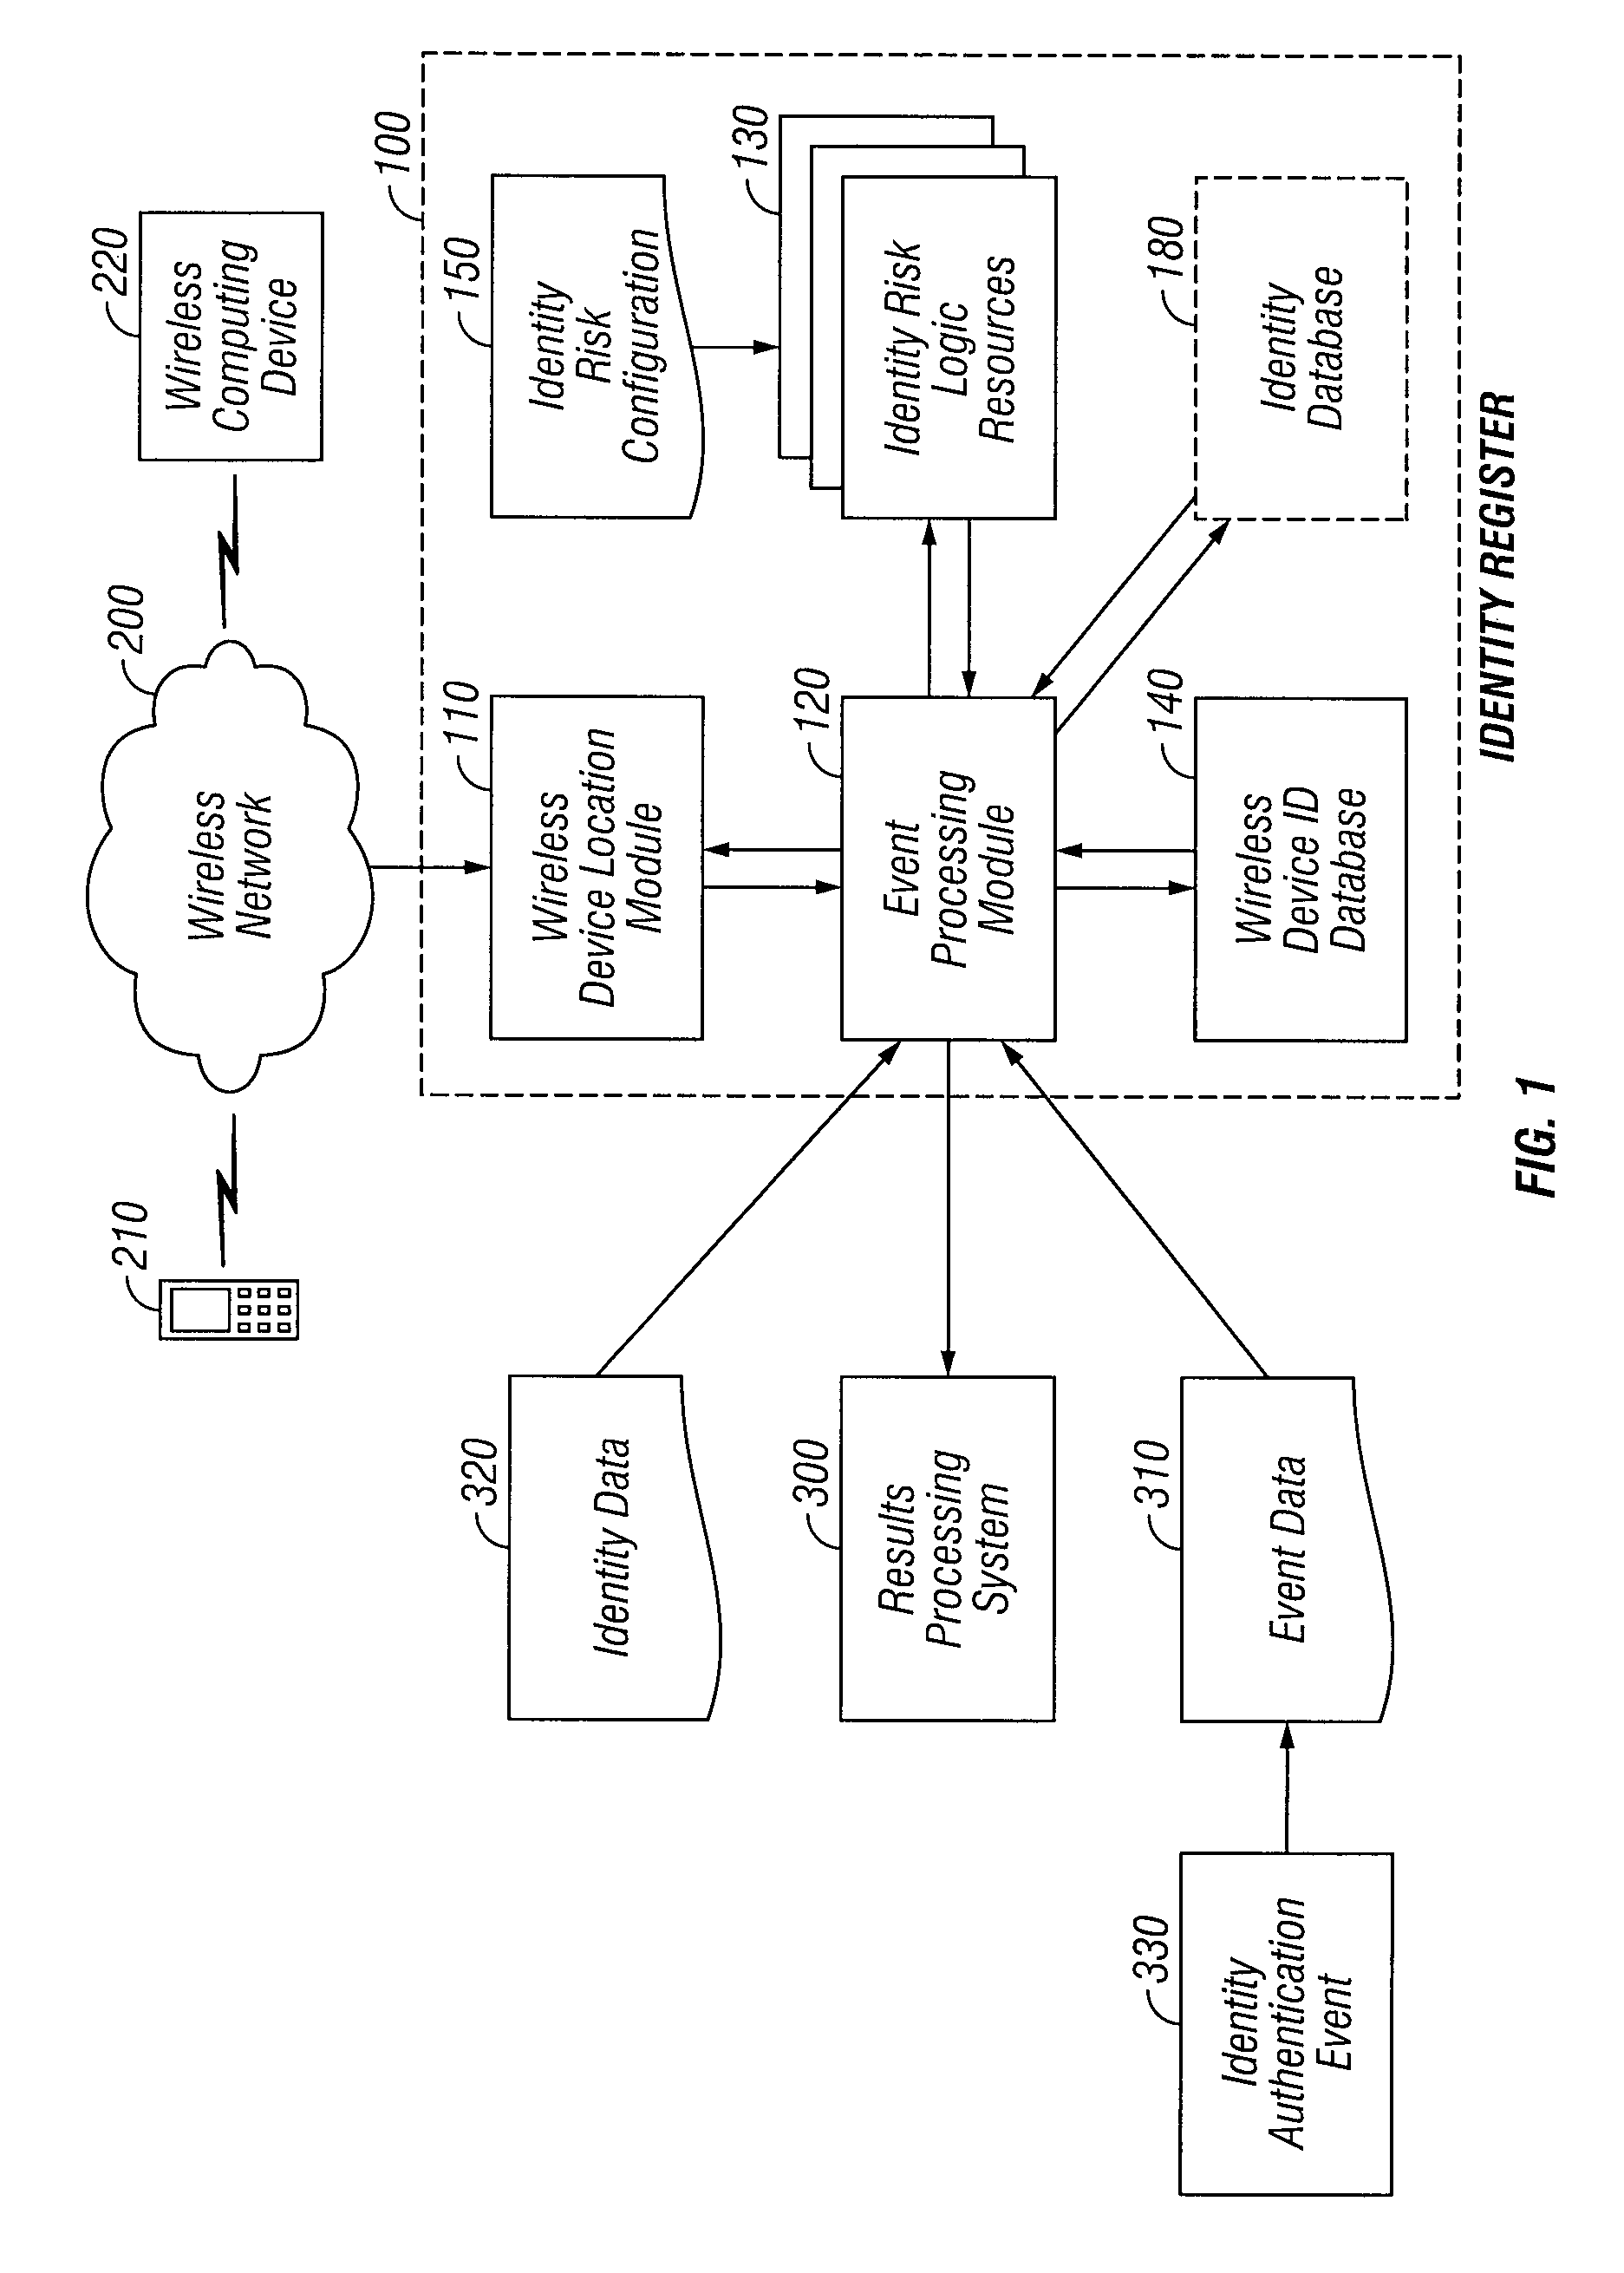 System and method for mobile identity protection of a user of multiple computer applications, networks or devices